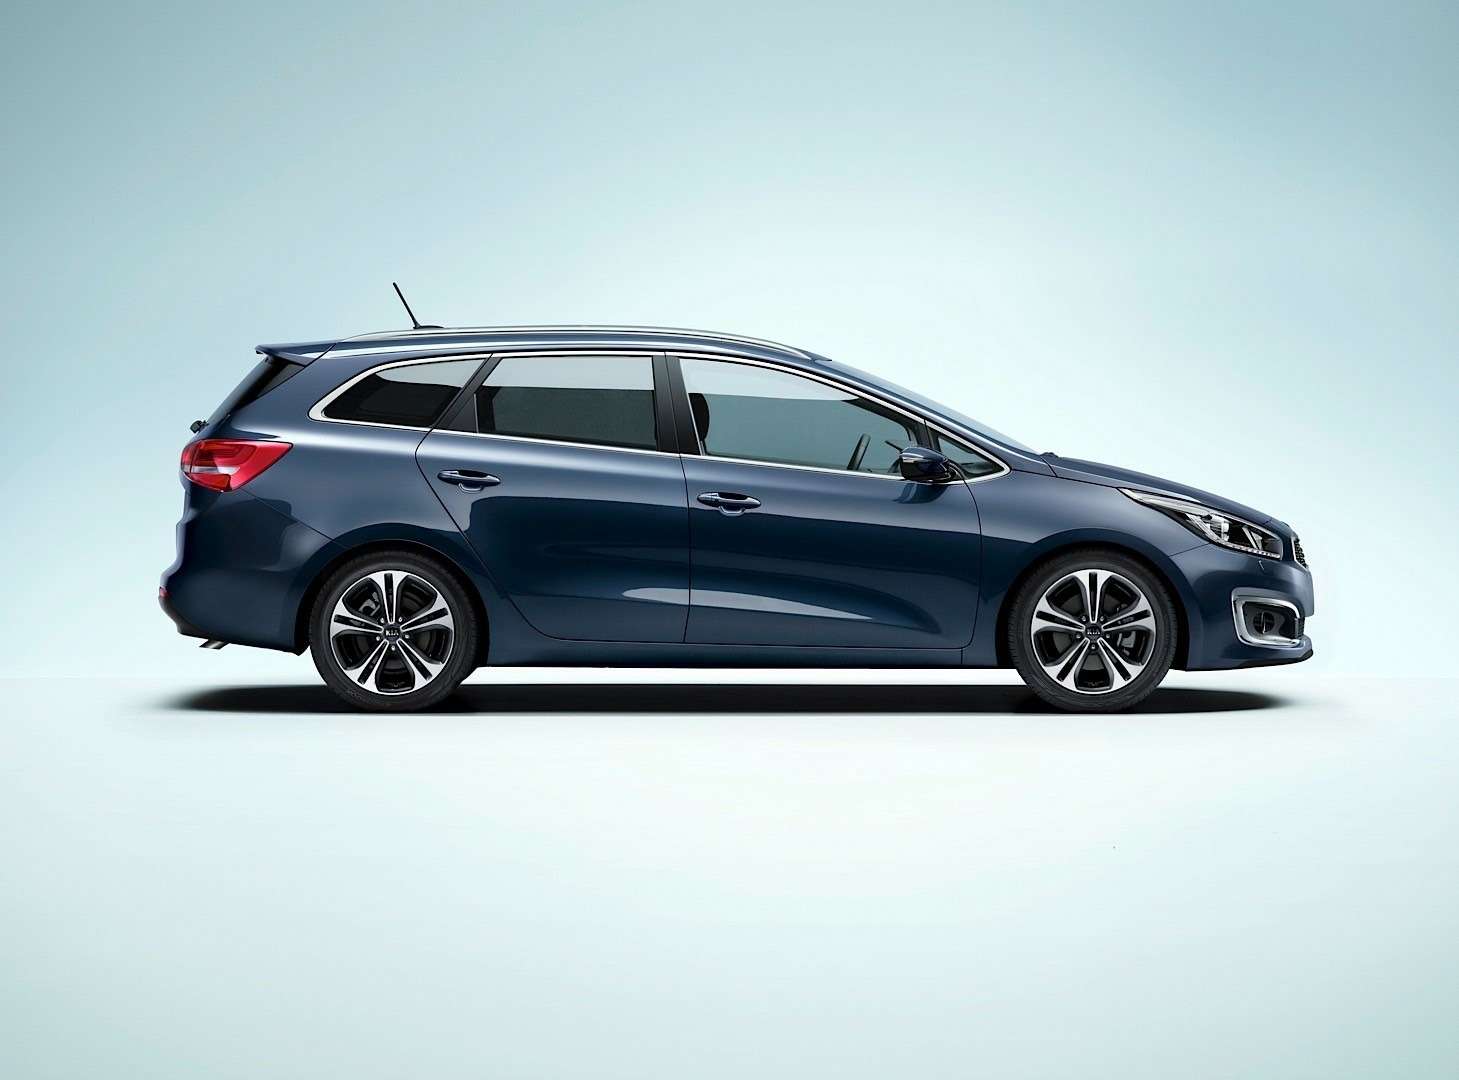 2016-kia-cee-d-brings-subtle-visual-upgrades-new-engines-and-sporty-gt-line-photo-gallery_1